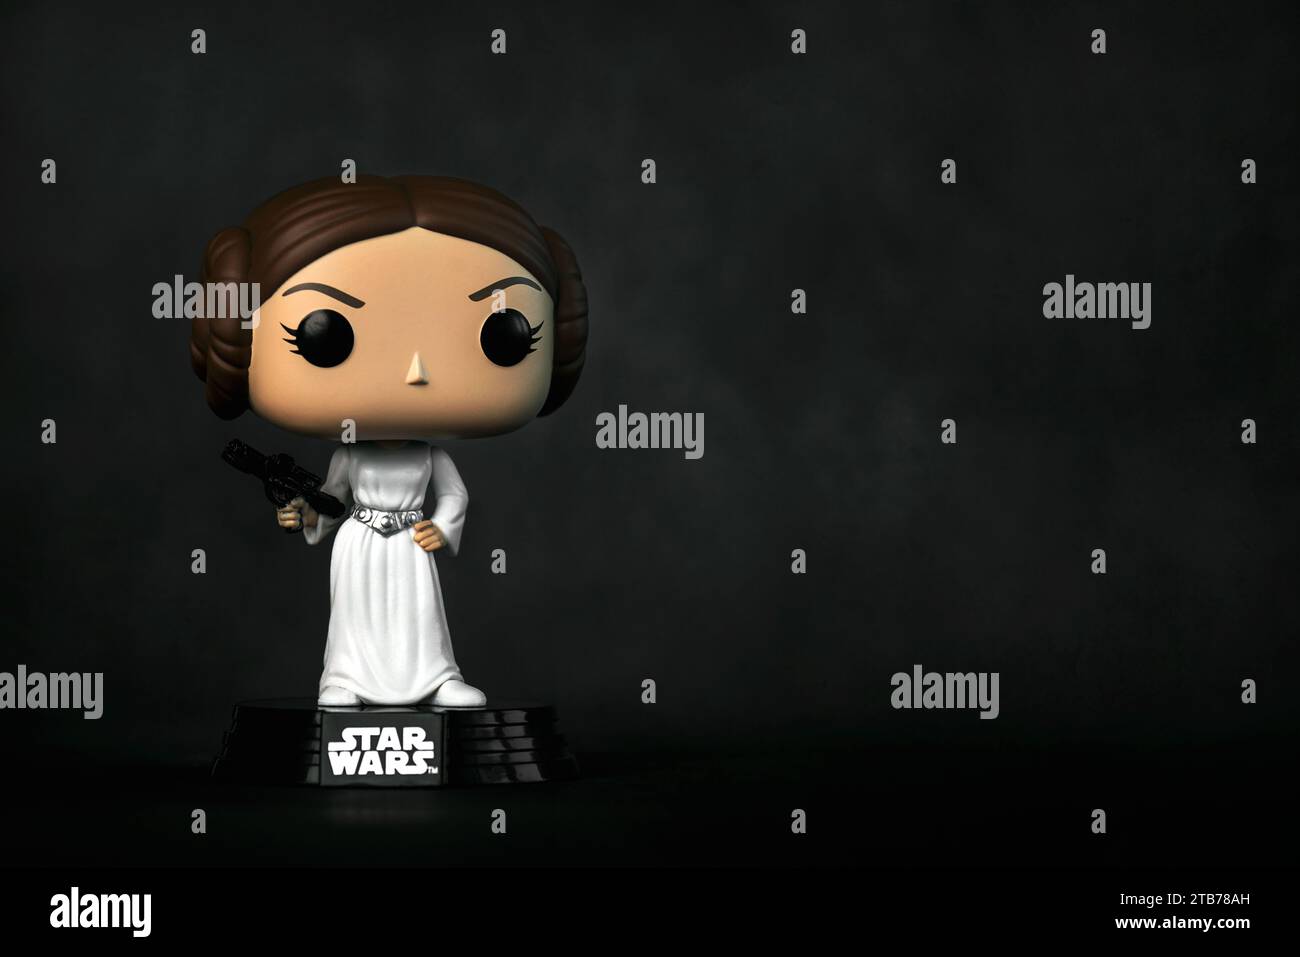 Funko POP vinyl figure of Princess Leia Organa from the movie Star Wars over grey background. Illustrative editorial of Funko Pop action figure Stock Photo